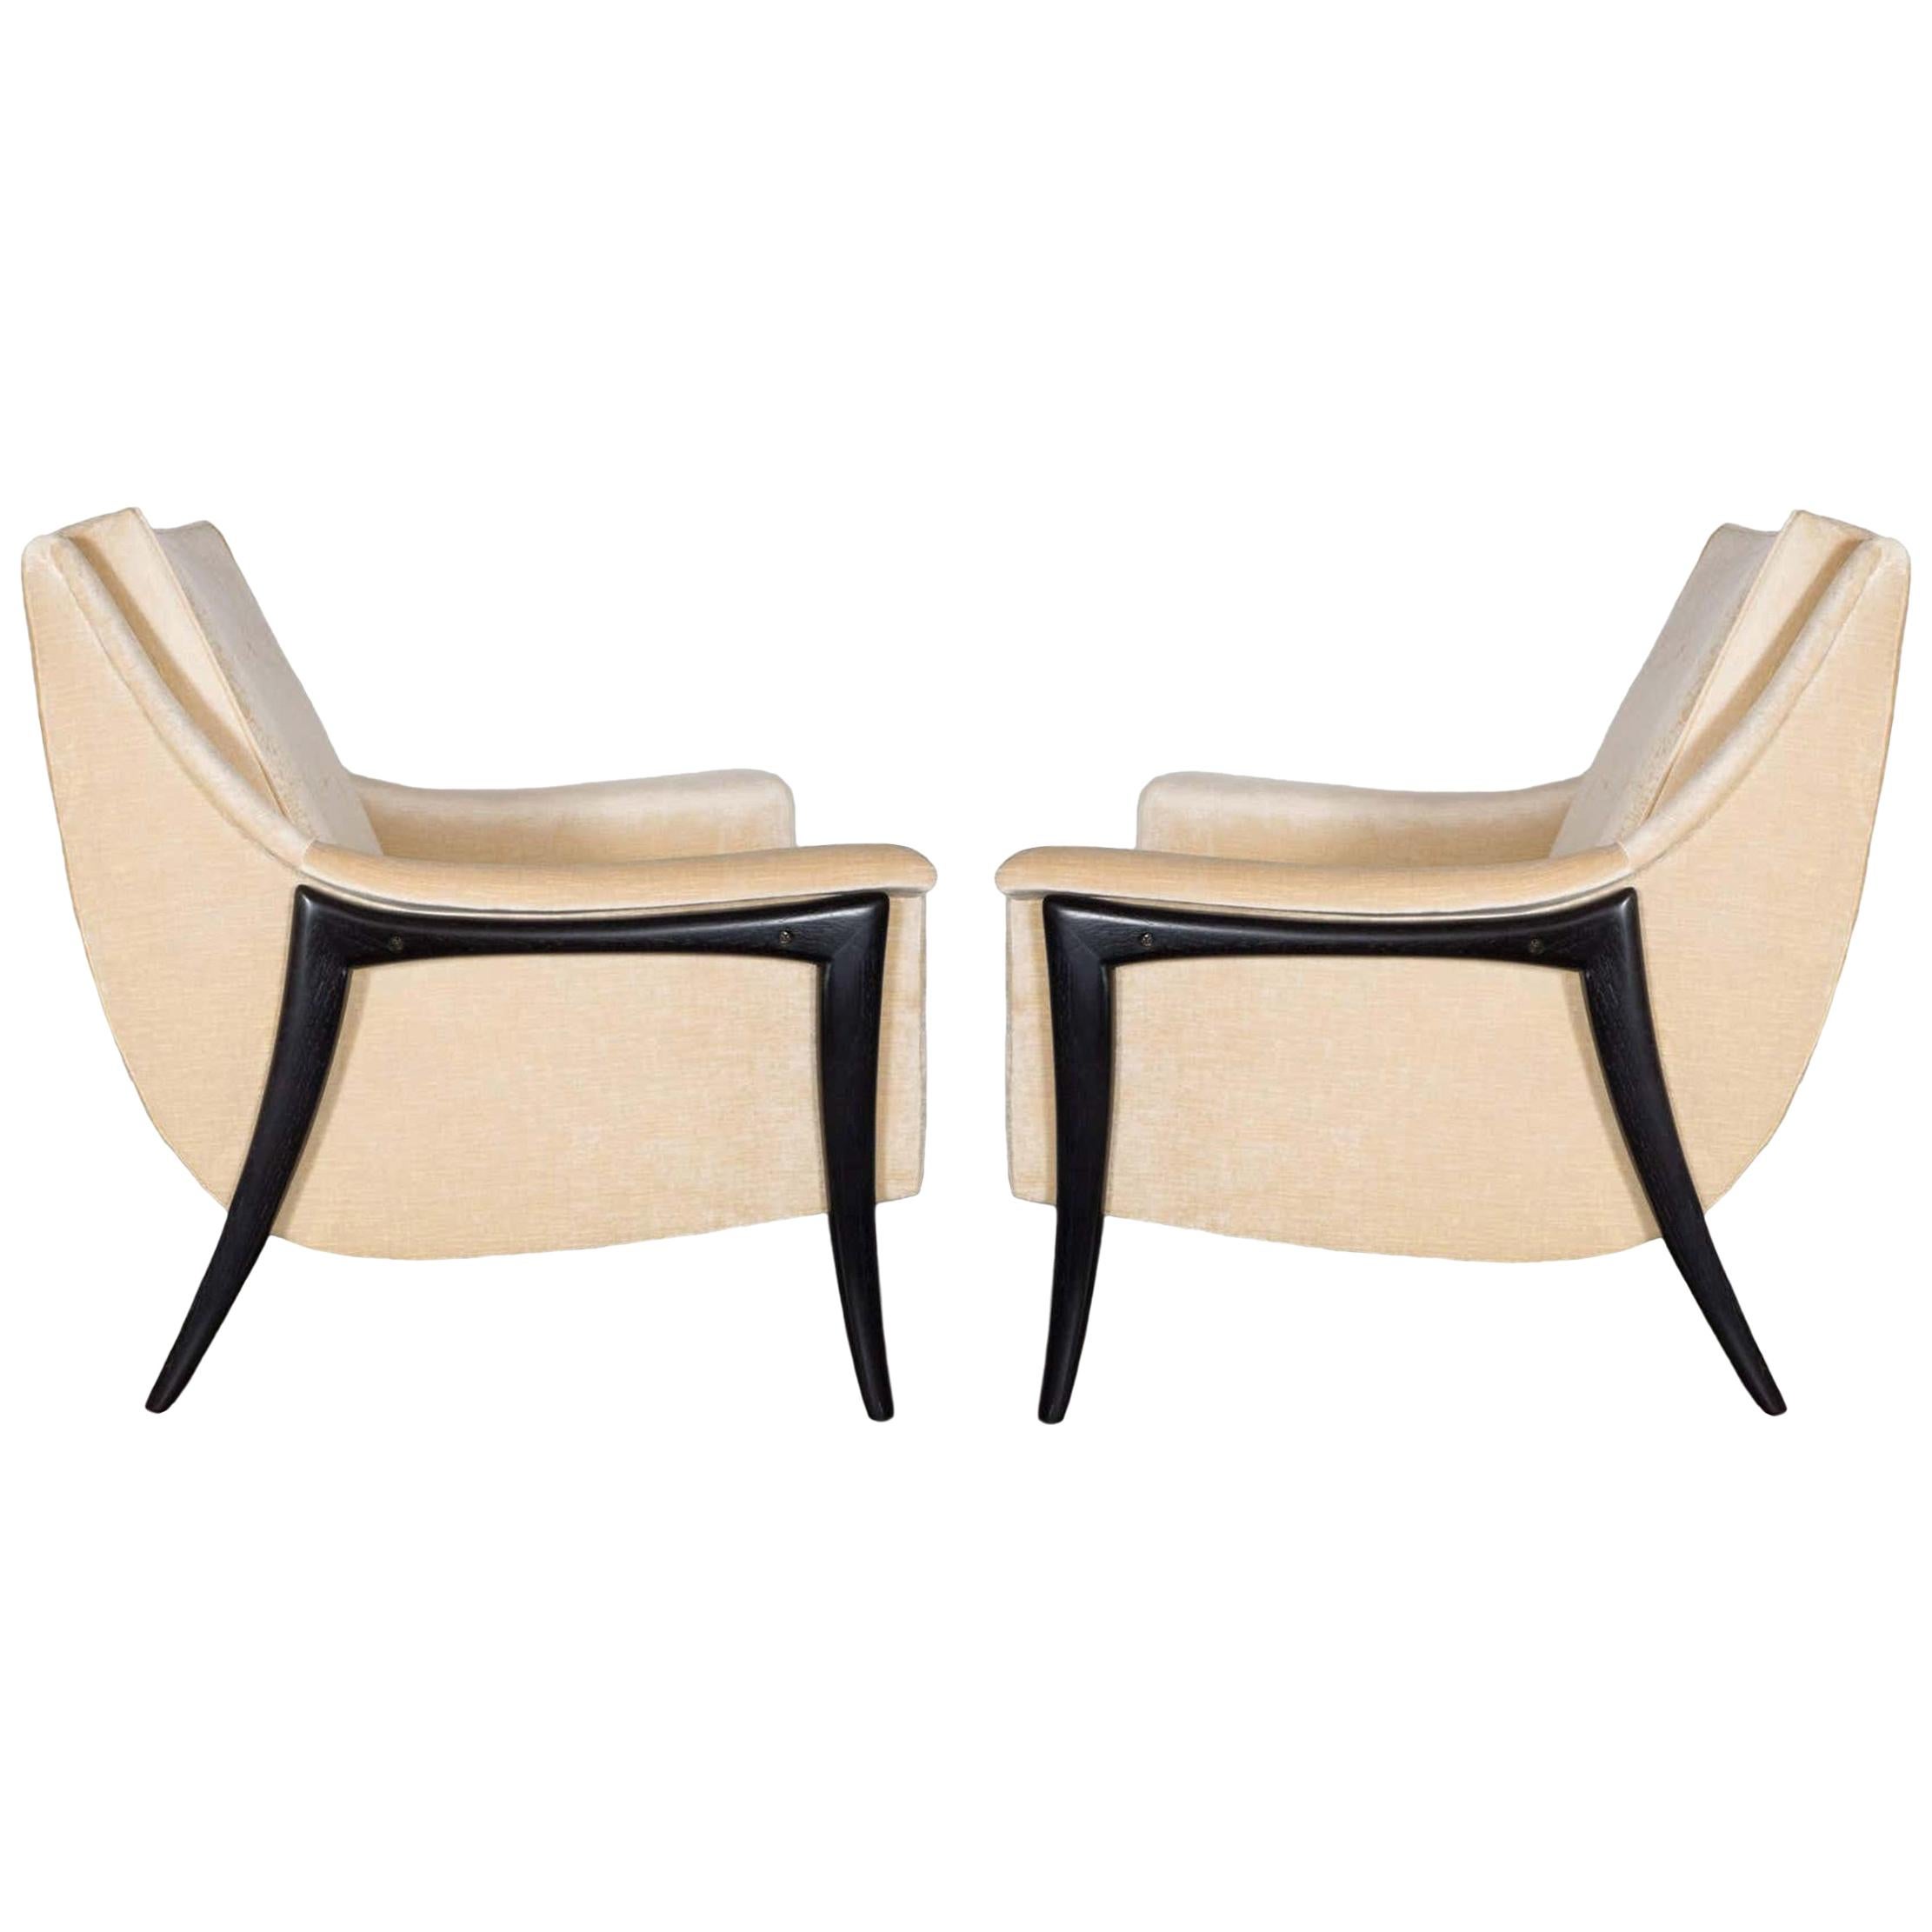 Pair of Kroehler Clean Modernist Sculptural Form Chairs, Restored For Sale